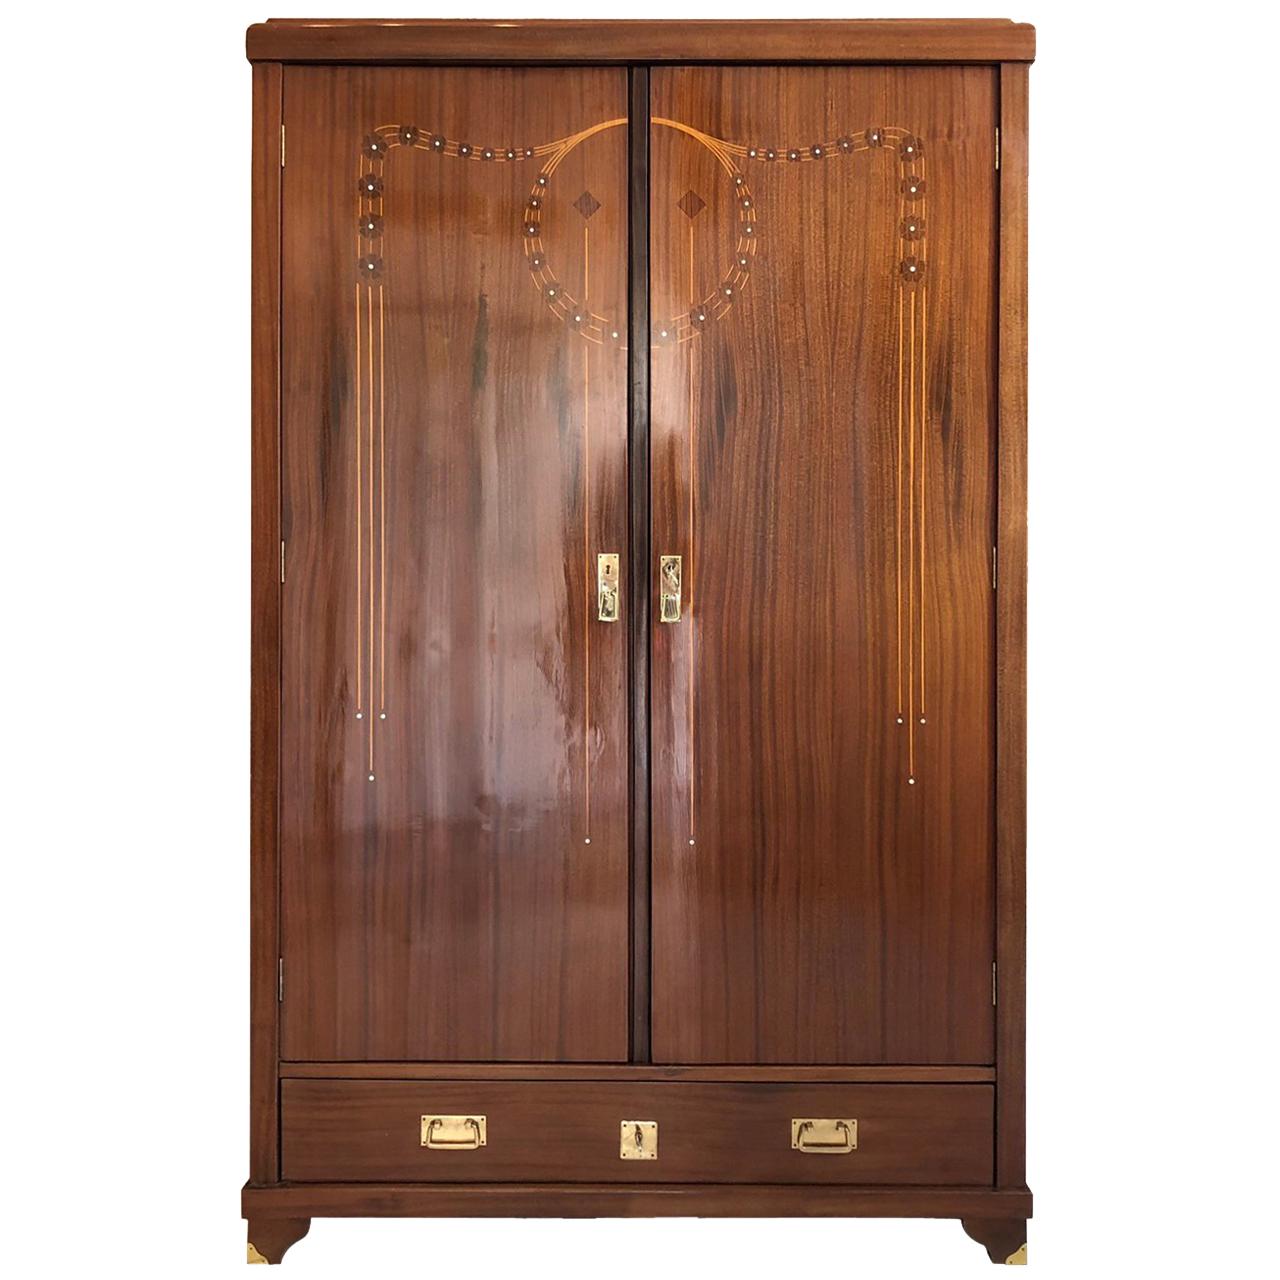 1920s Art Nouveau Wardrobe with Marquetry Made of Walnut For Sale